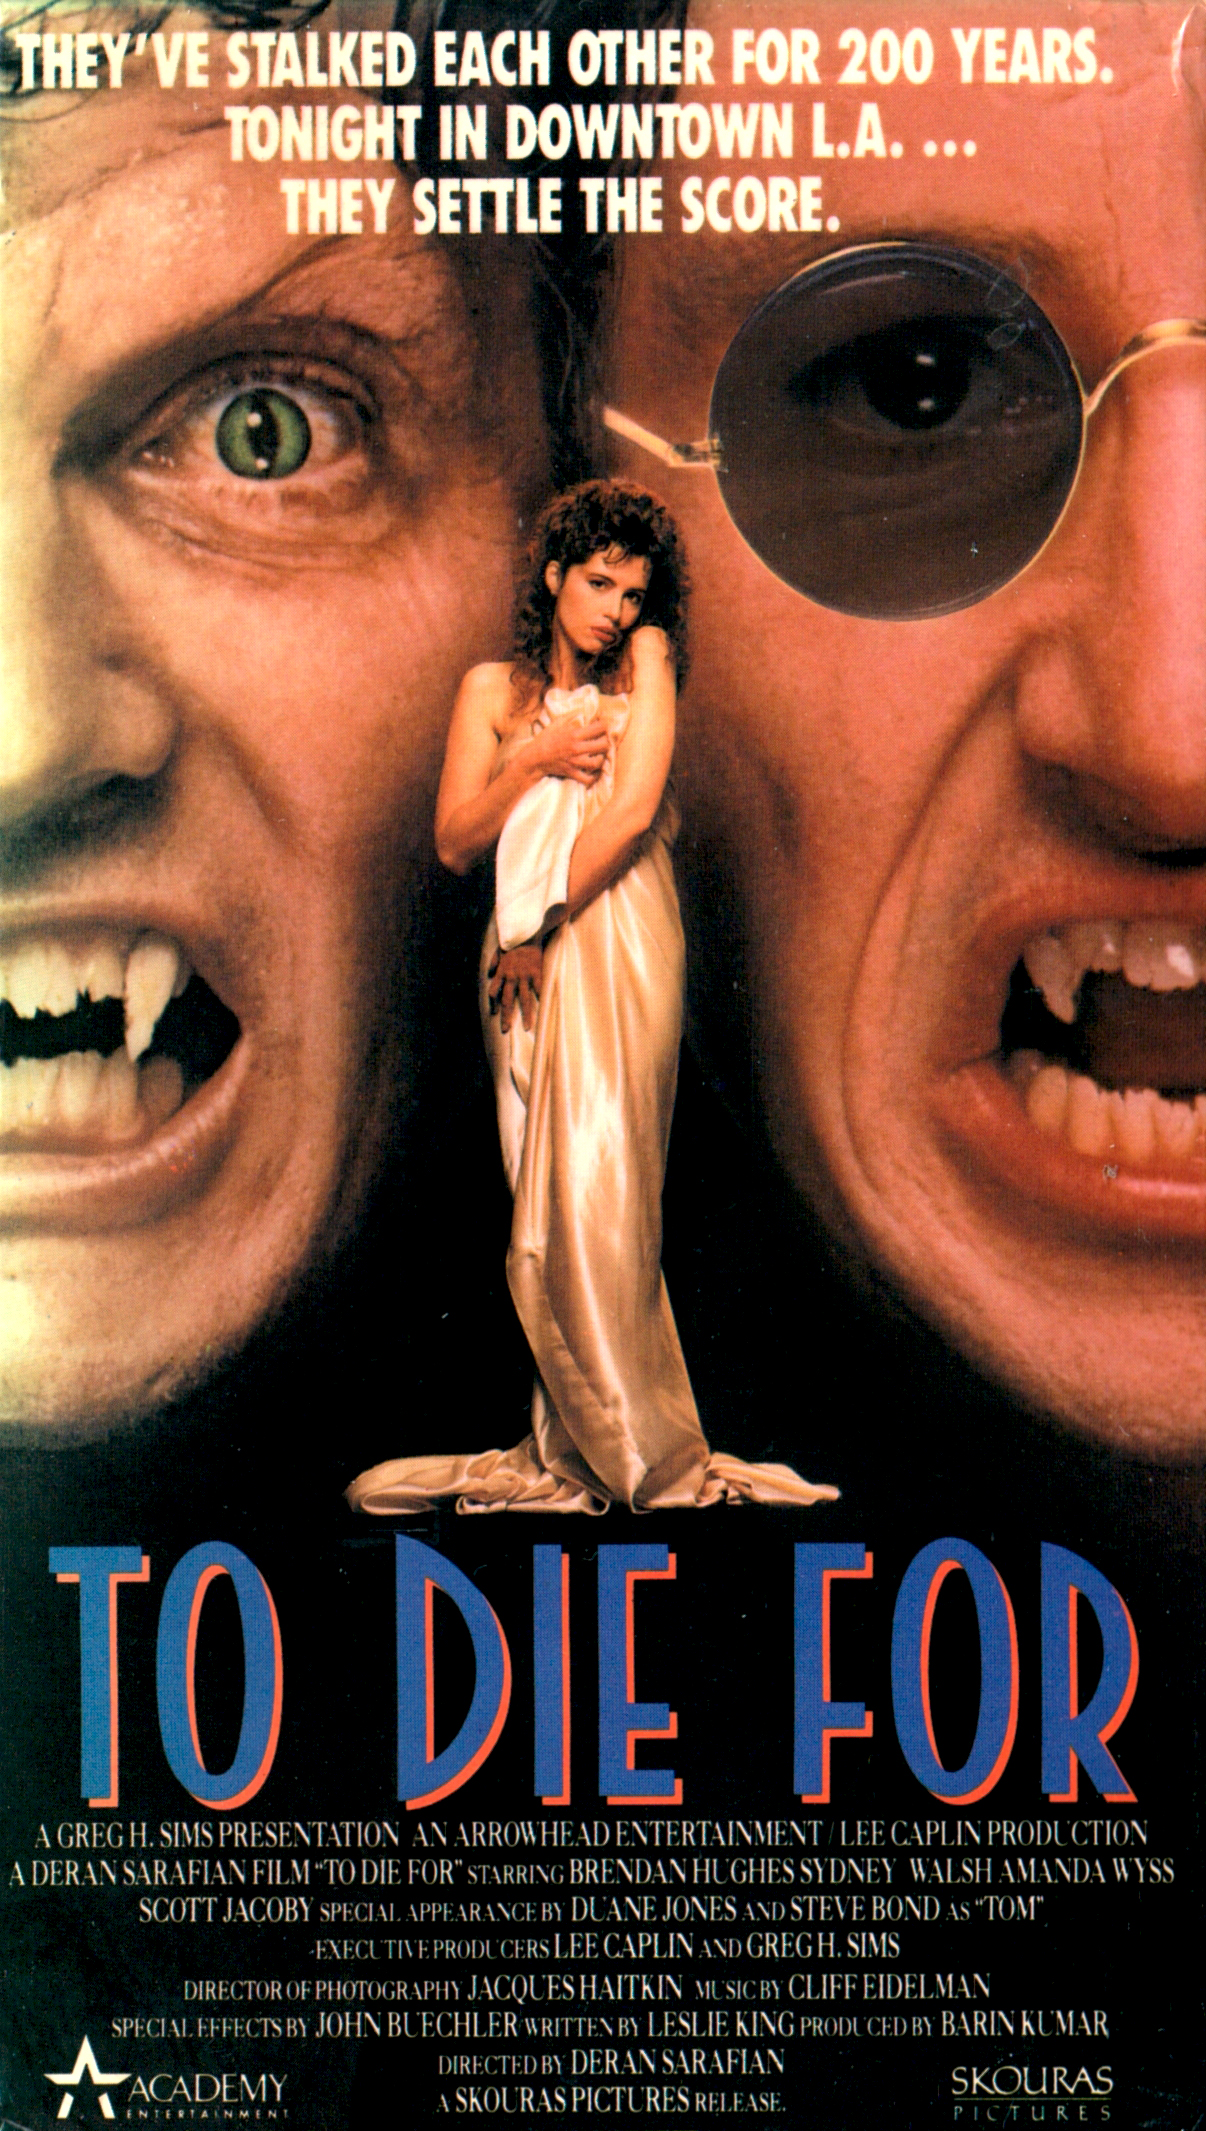 To Die For (1988) Screenshot 3 